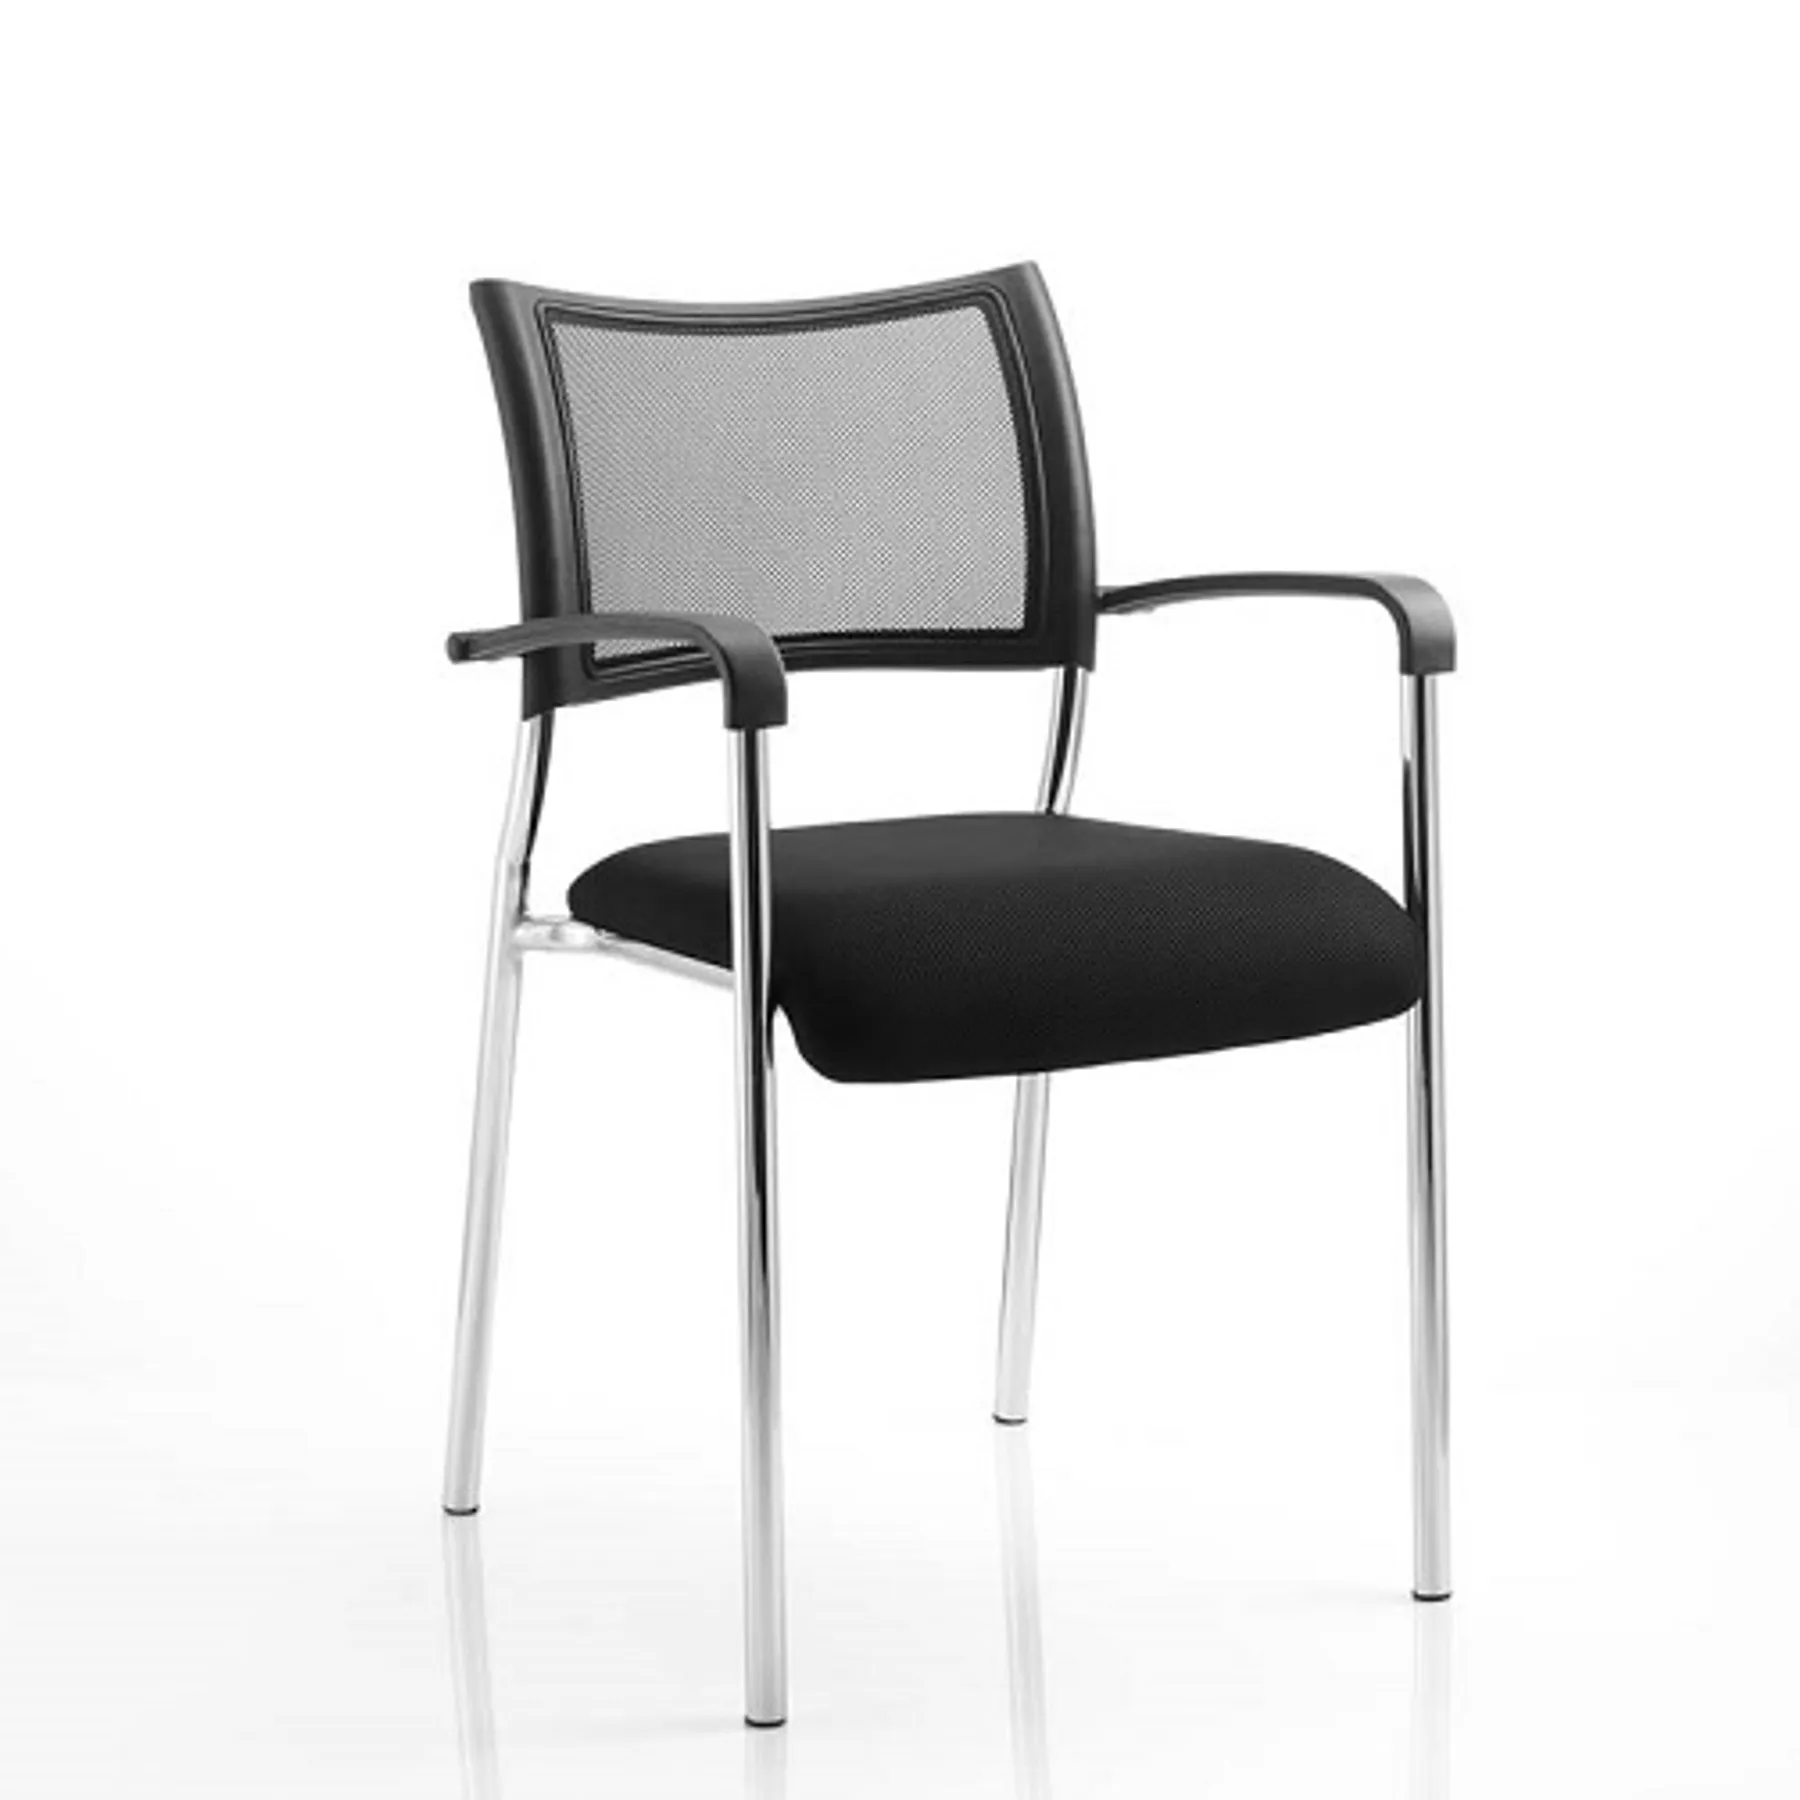 LOF_Direct_Dynamic_Brunswick_Meeting_Chairs_Mesh-Back_Chrome_Frame_with_arms_BR000025